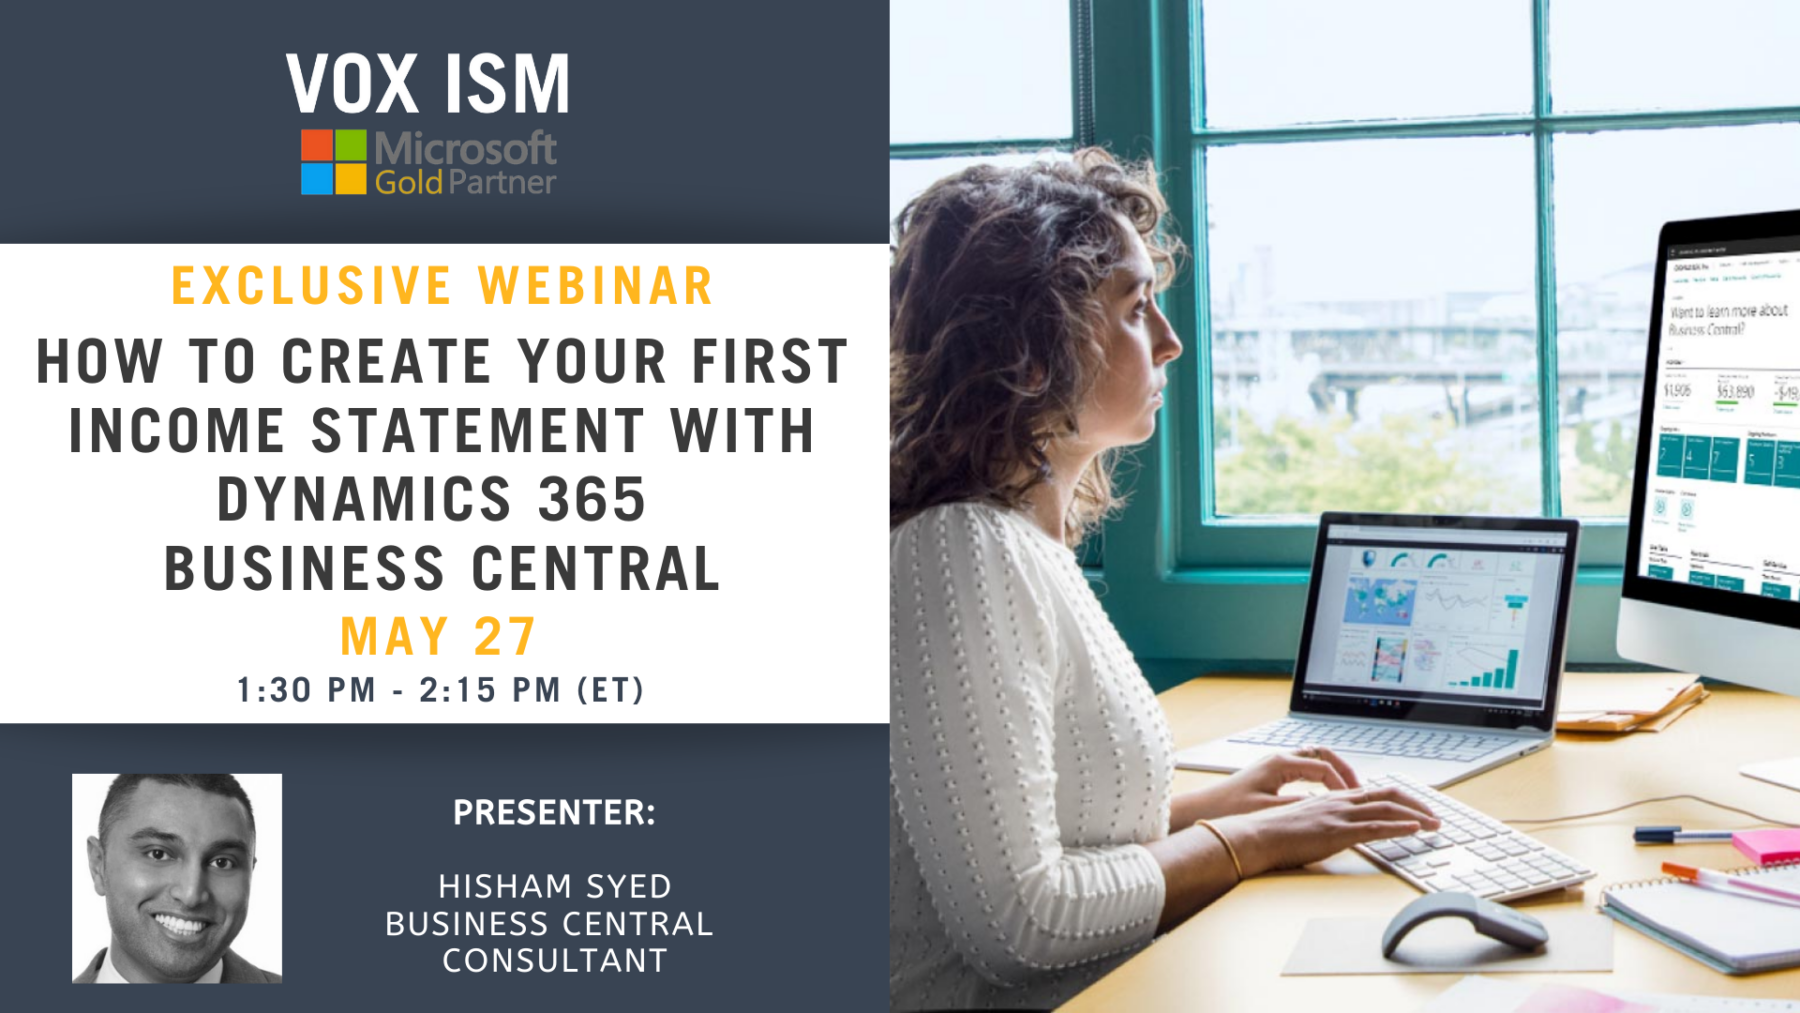 How to create your first income statement with Dynamics 365 Business Central - May 27 - Webinar